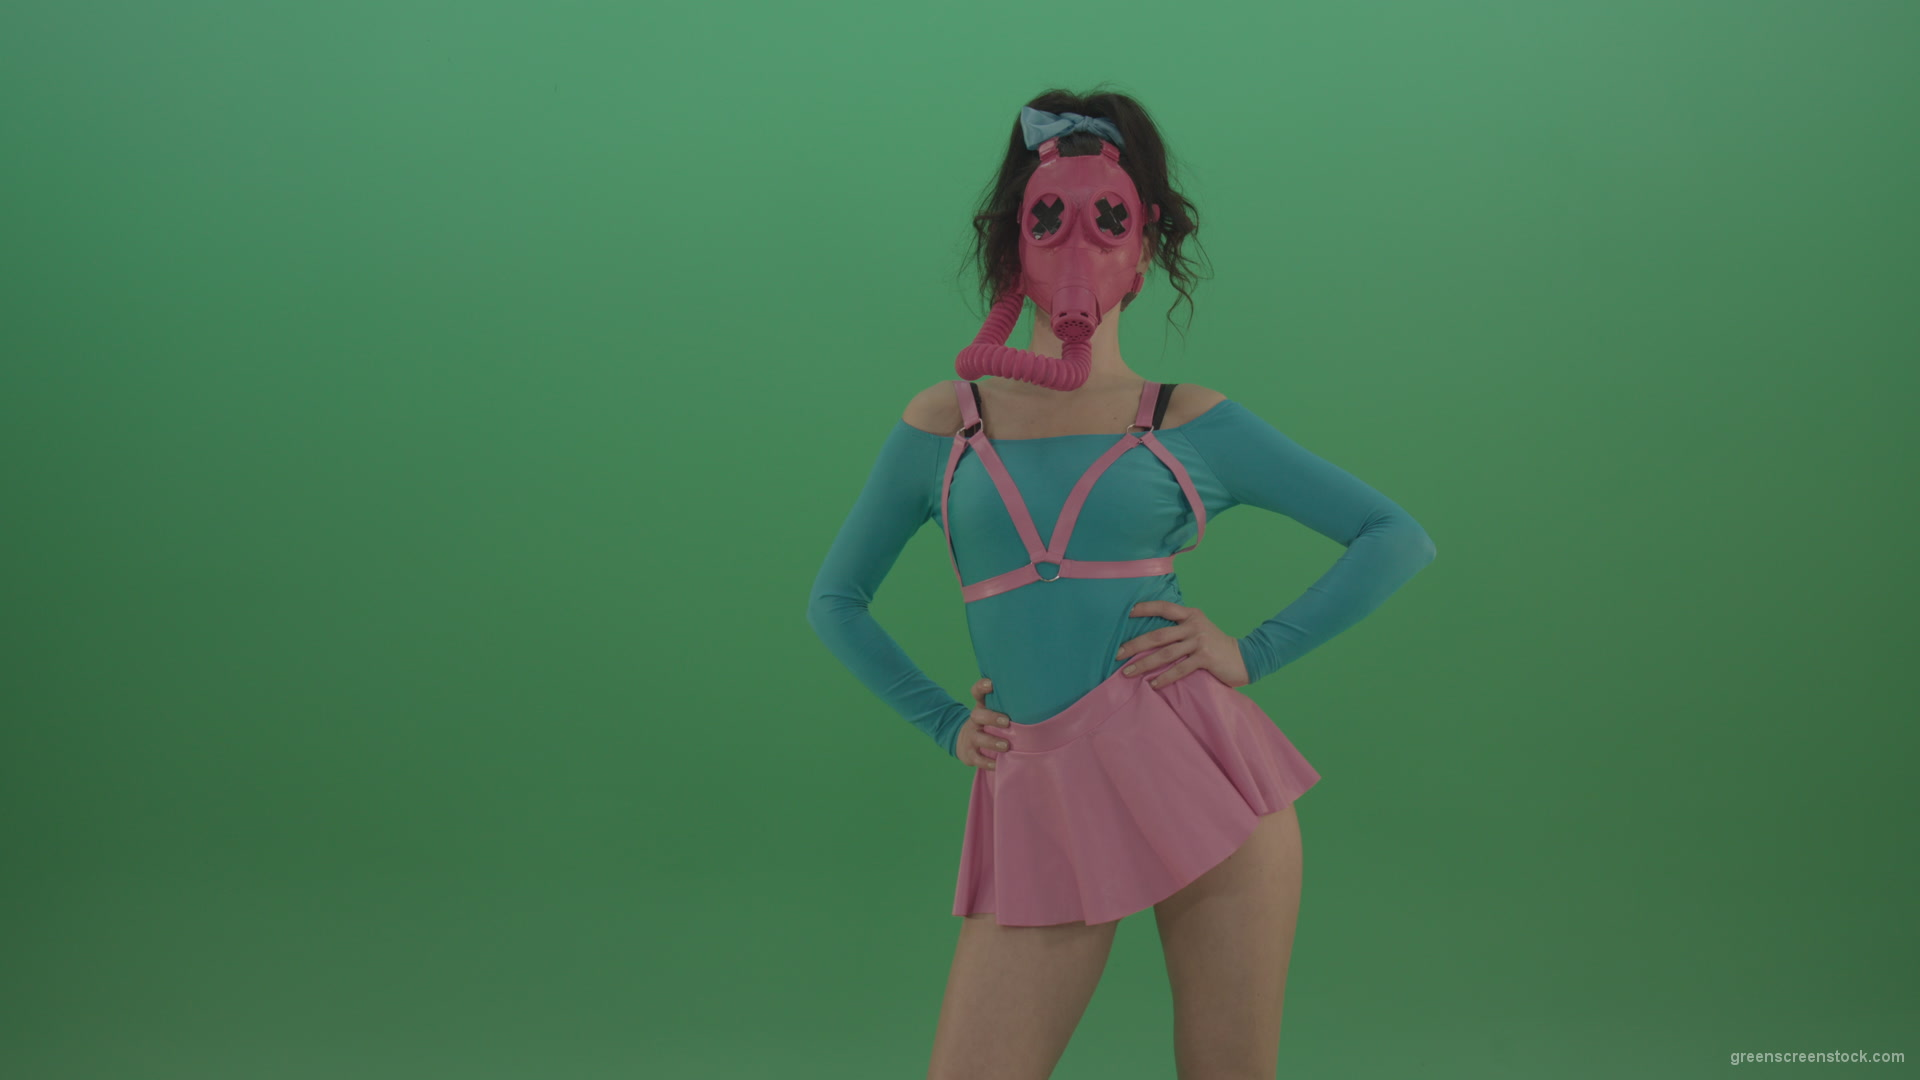 Beautiful-erotic-dance-from-a-woman-in-a-mask-in-a-pink-suit-on-green-background_002 Green Screen Stock